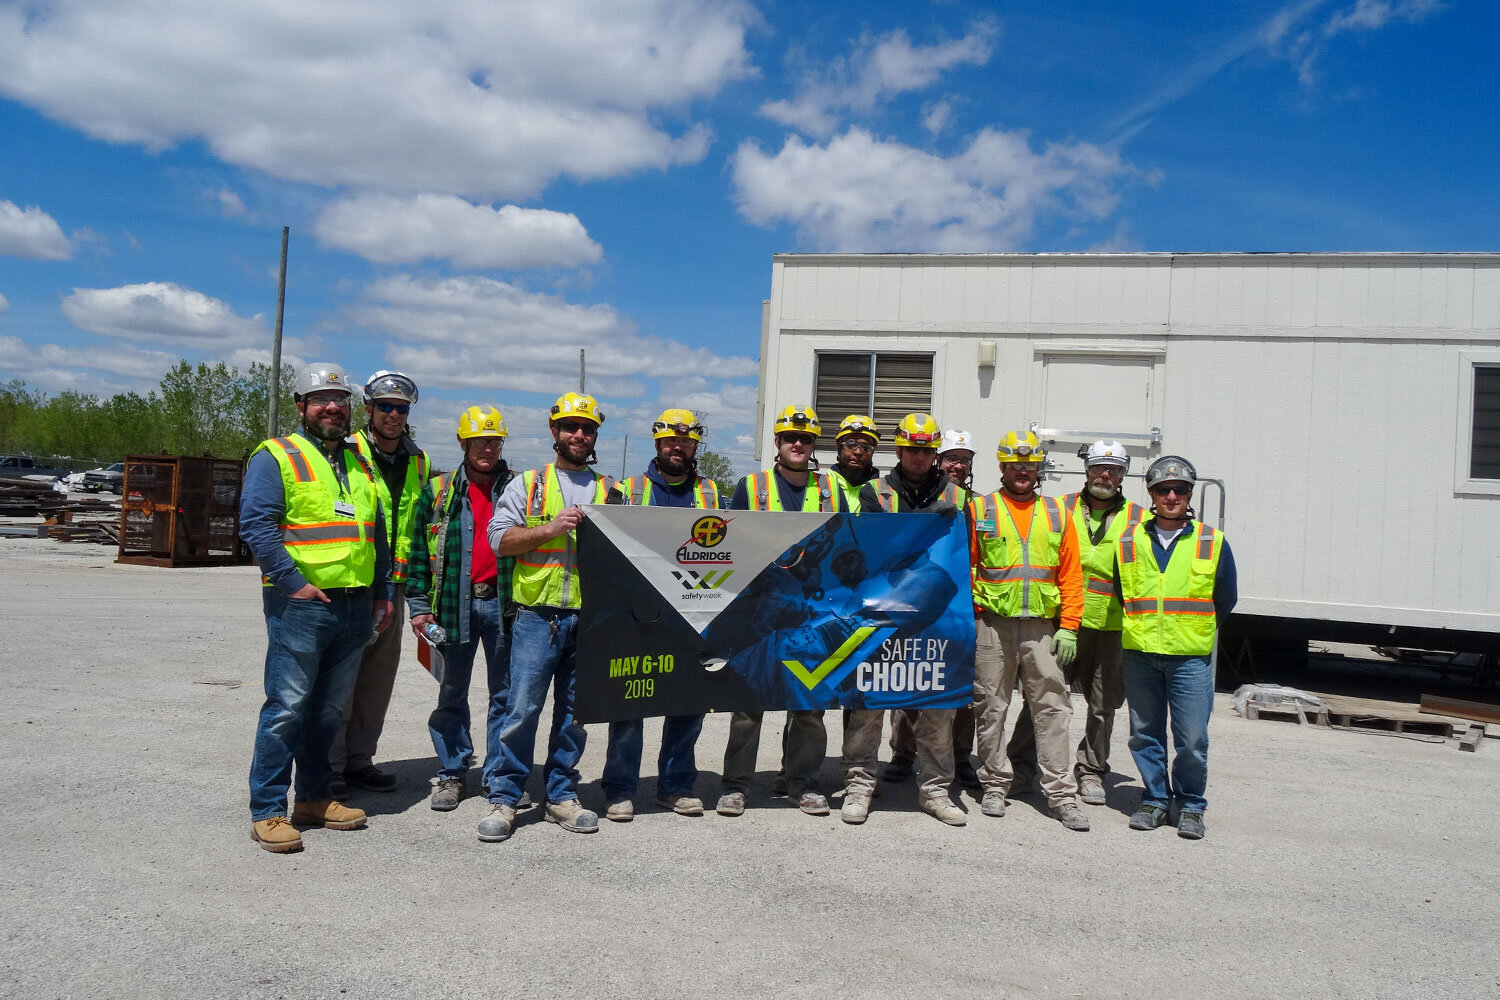 safe-by-choice-safety-week-aldridge-electric-banner-nationwide-workers.jpg